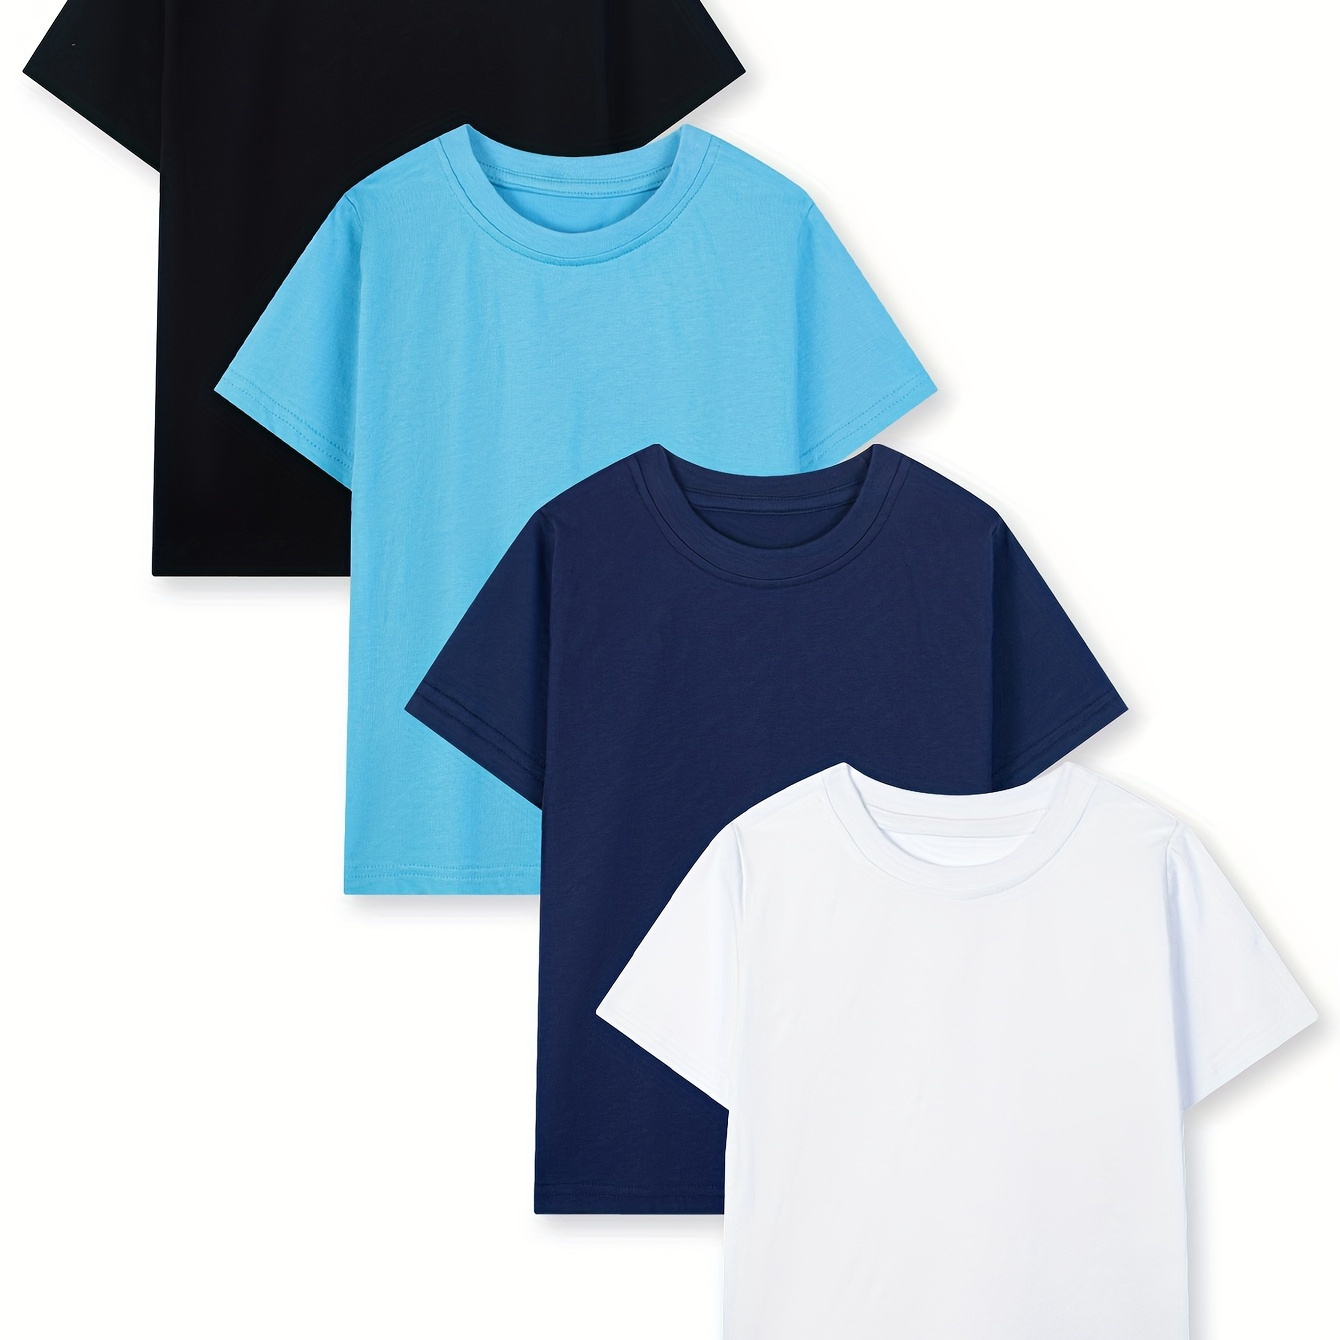 

4 Pieces For Boys Medium And Large Boys Short Sleeve T-shirt Round Neck Pullover Cotton Casual Comfort Football Solid Color Basic T-shirt Top 6-12y